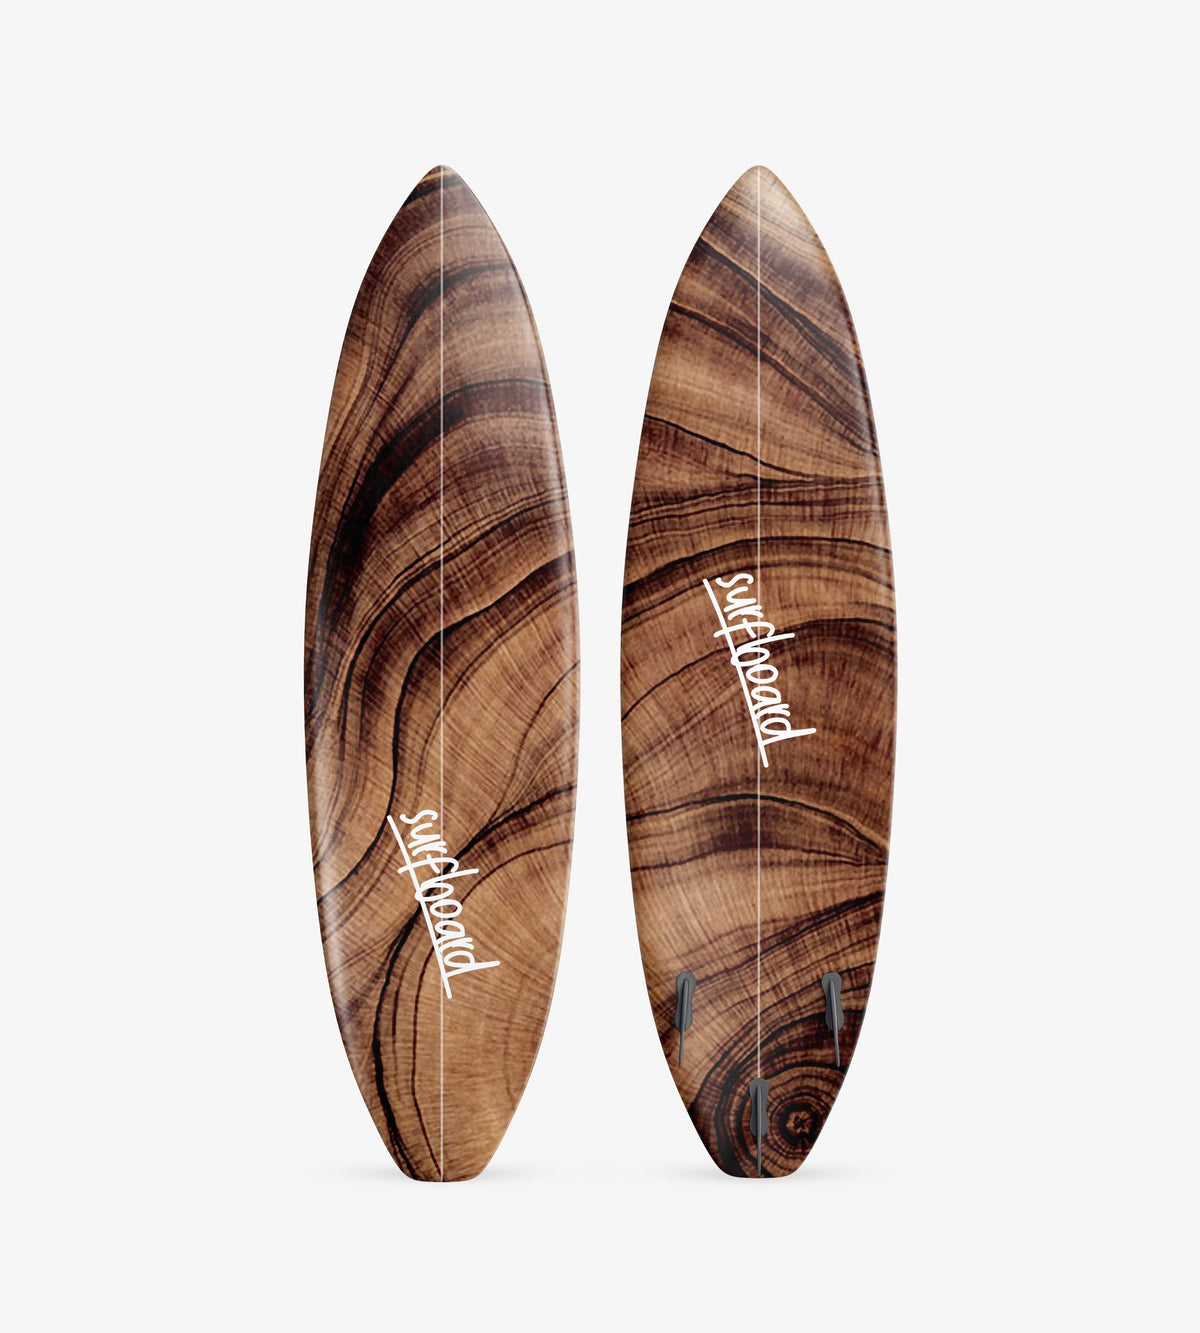 (Product 7) Sample - Surfboards And Accessories For Sale